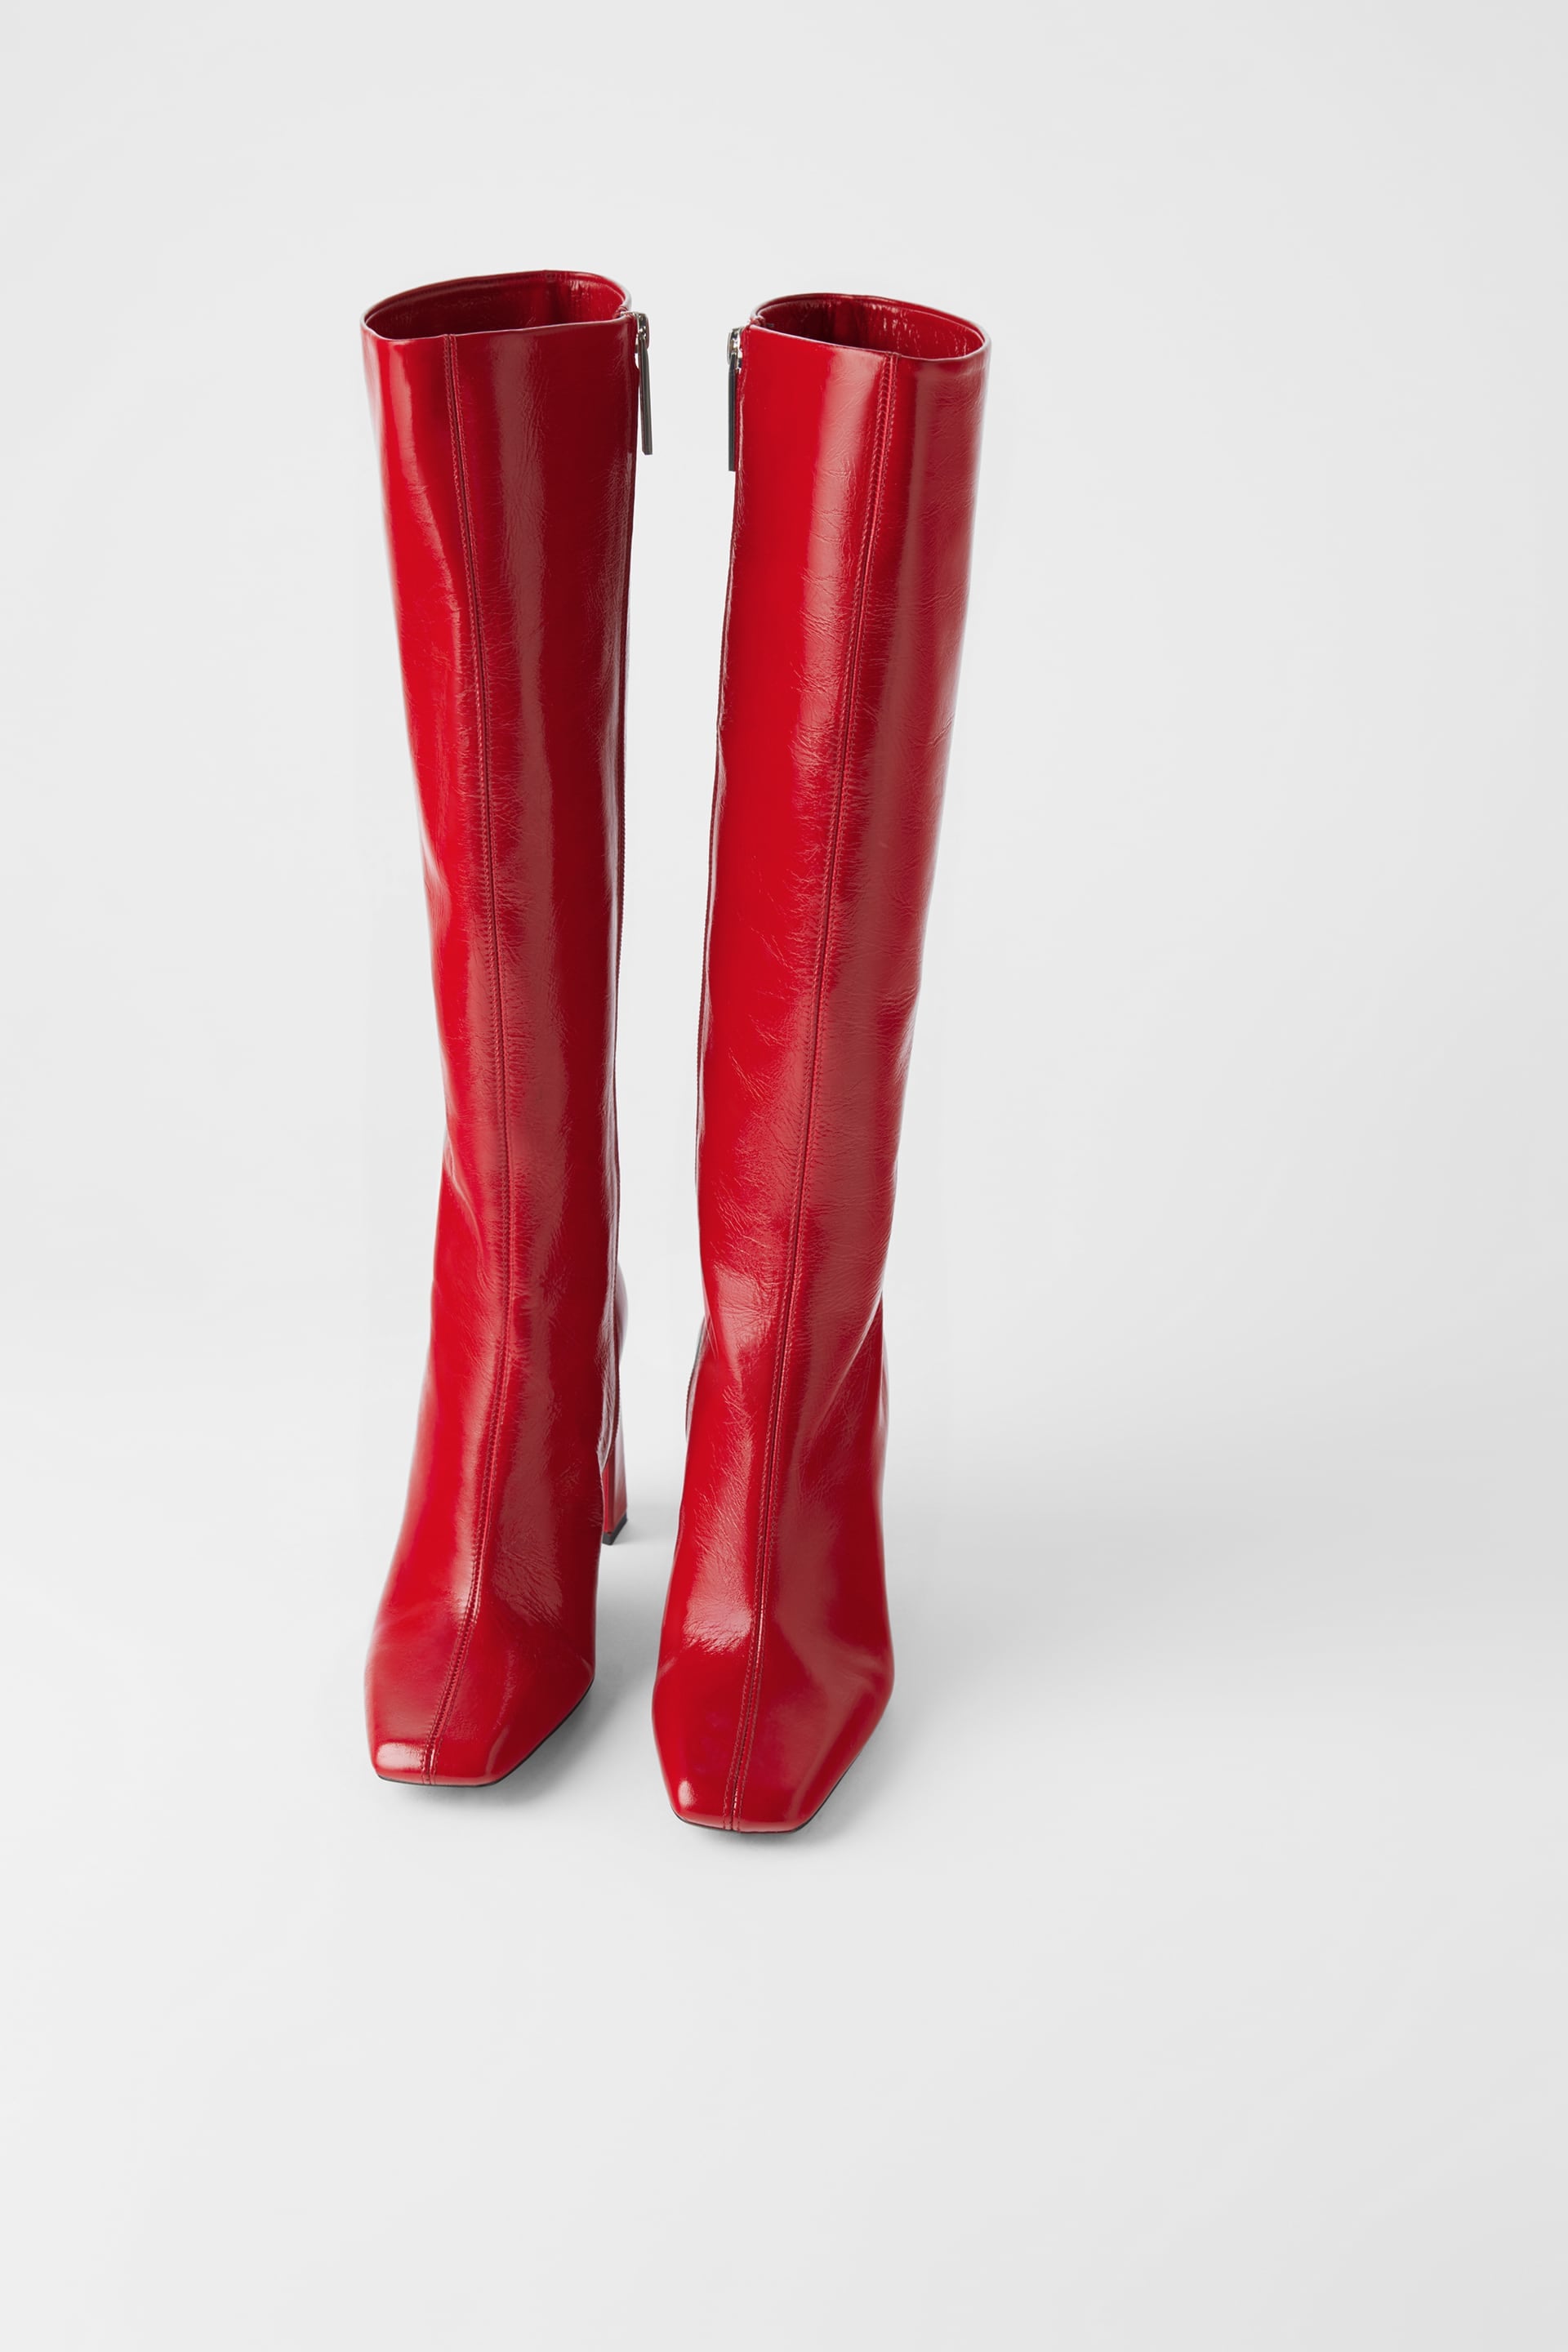 Zara Patent Leather Heeled Boots 